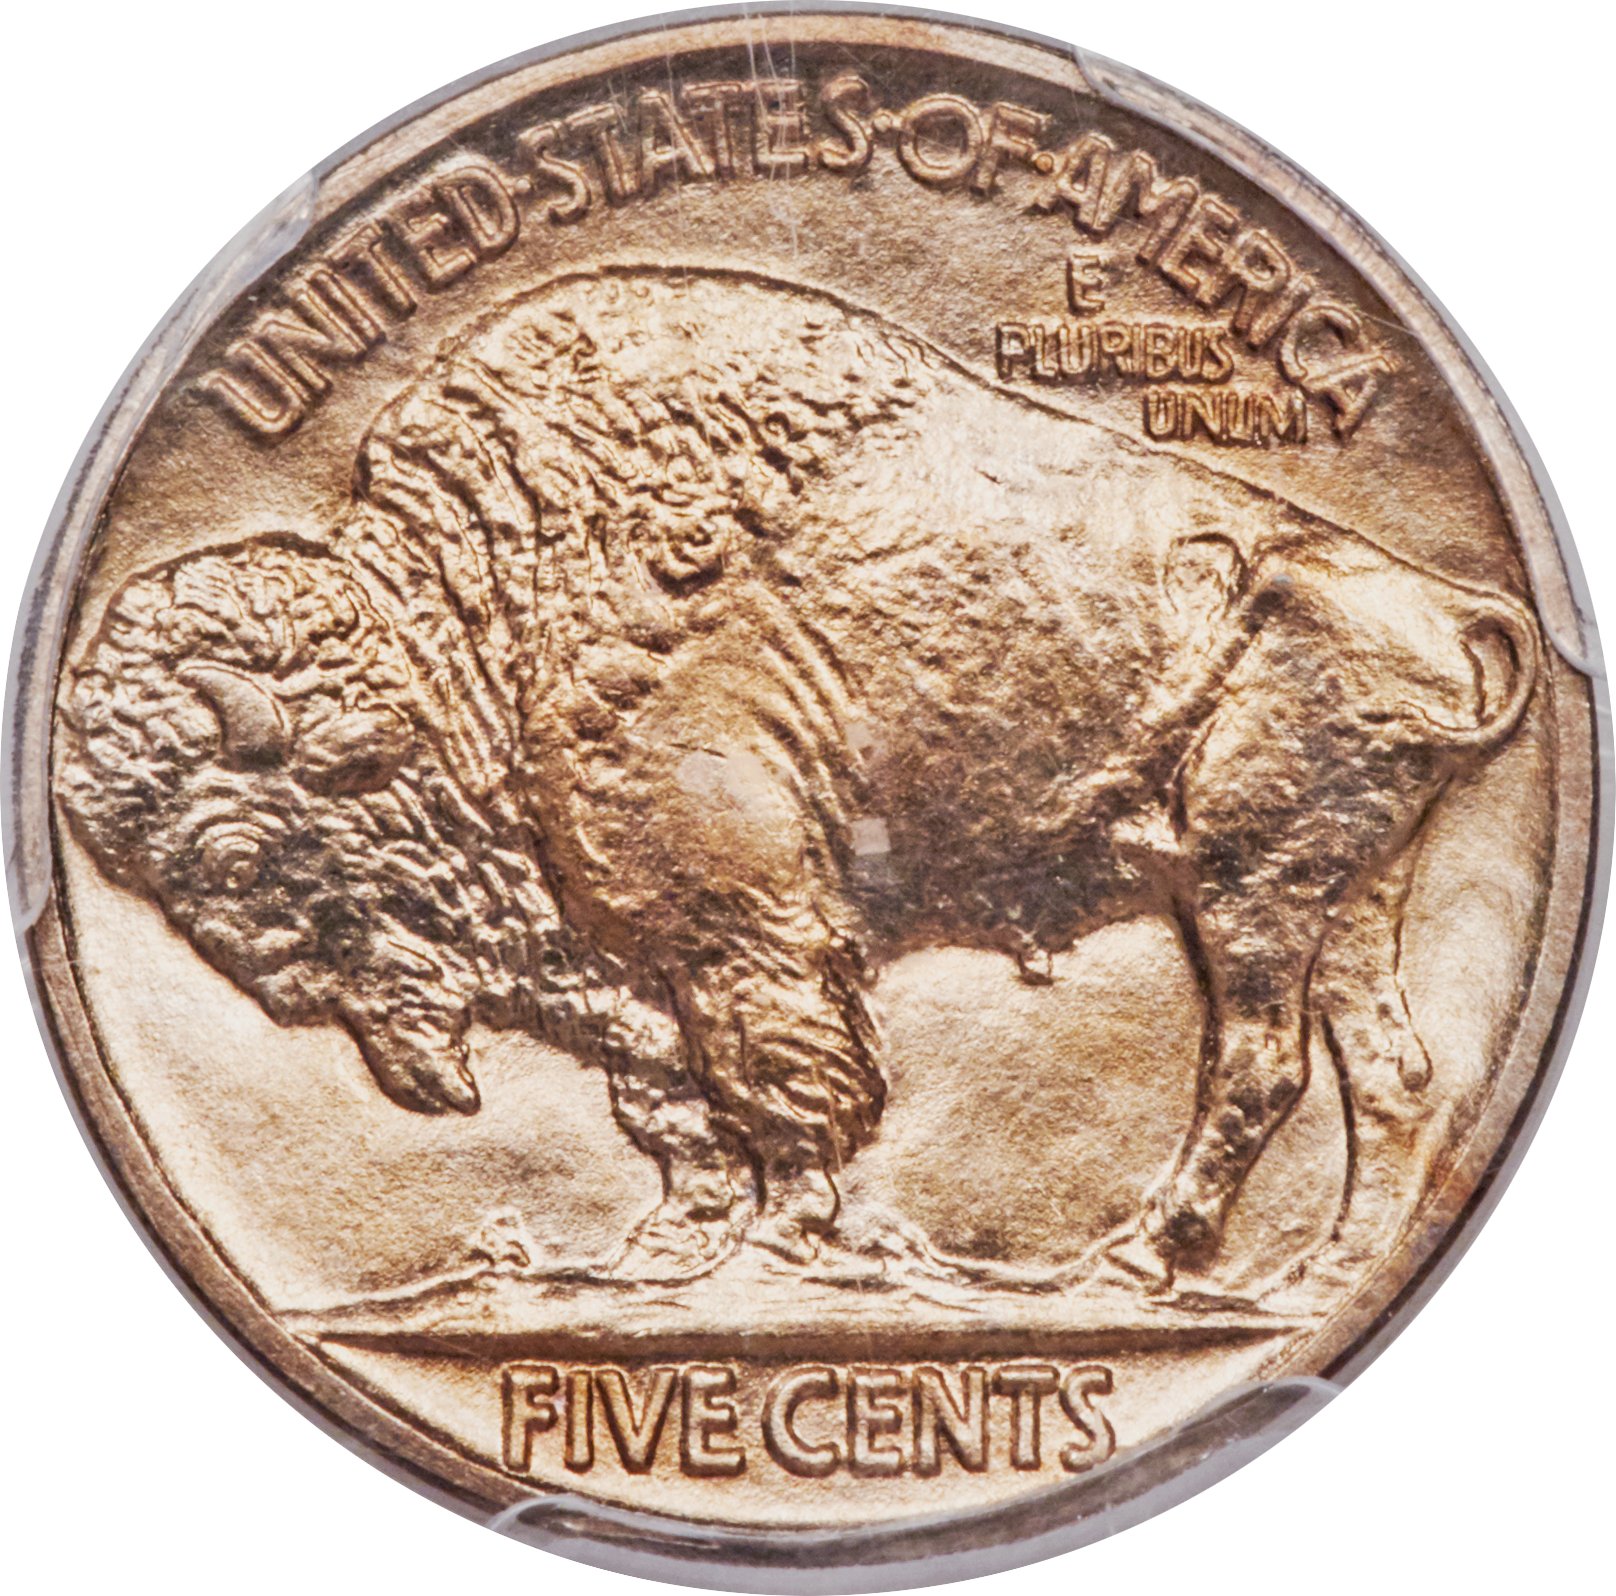 enlarged image for The Wonderful World Of Buffalo Nickel Collecting: An Appreciation Of The “Most American” Of All Coin Designs